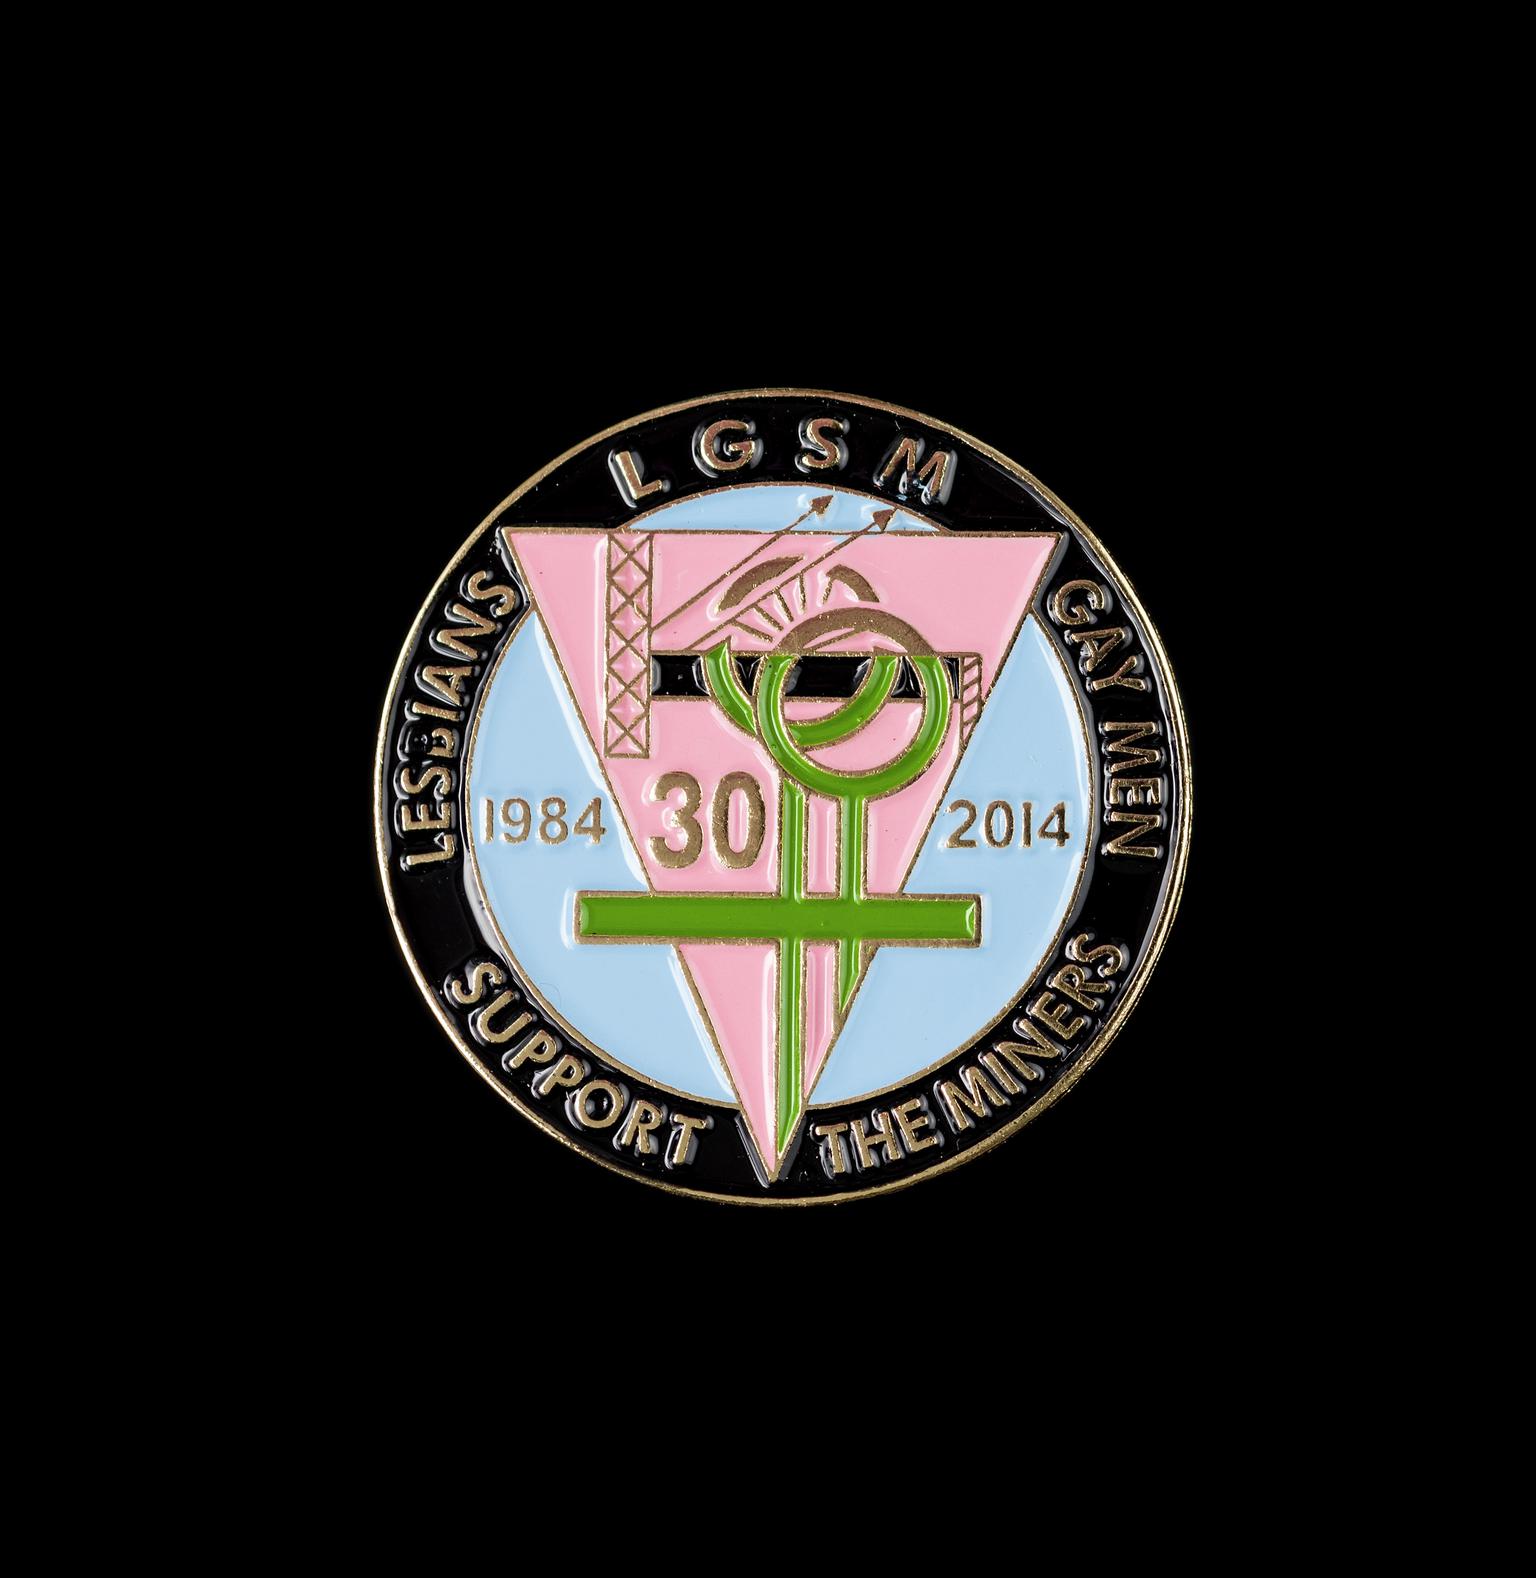 Lesbians & Gay Men Support the Miners, badge